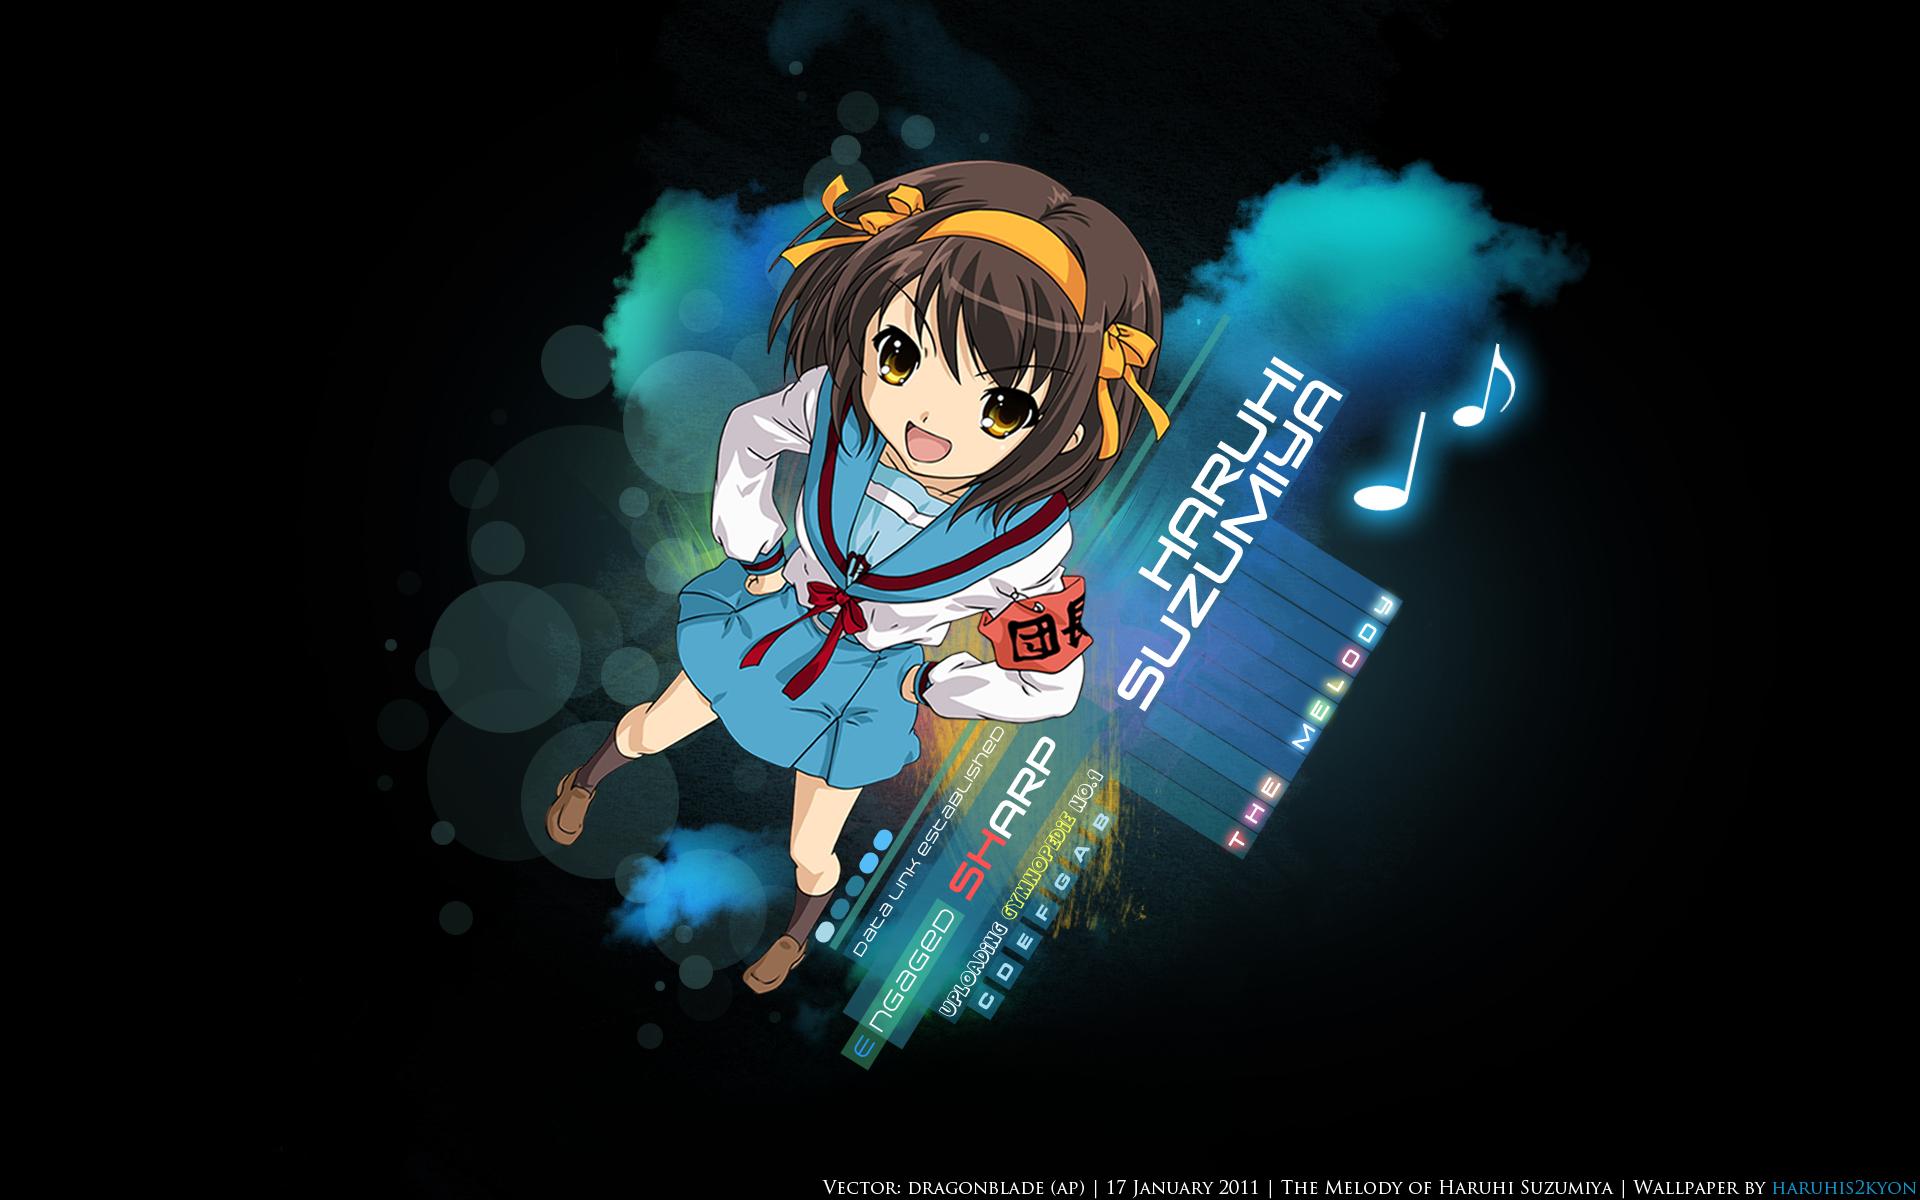 The Melancholy of Suzumiya Haruhi and Scan Gallery